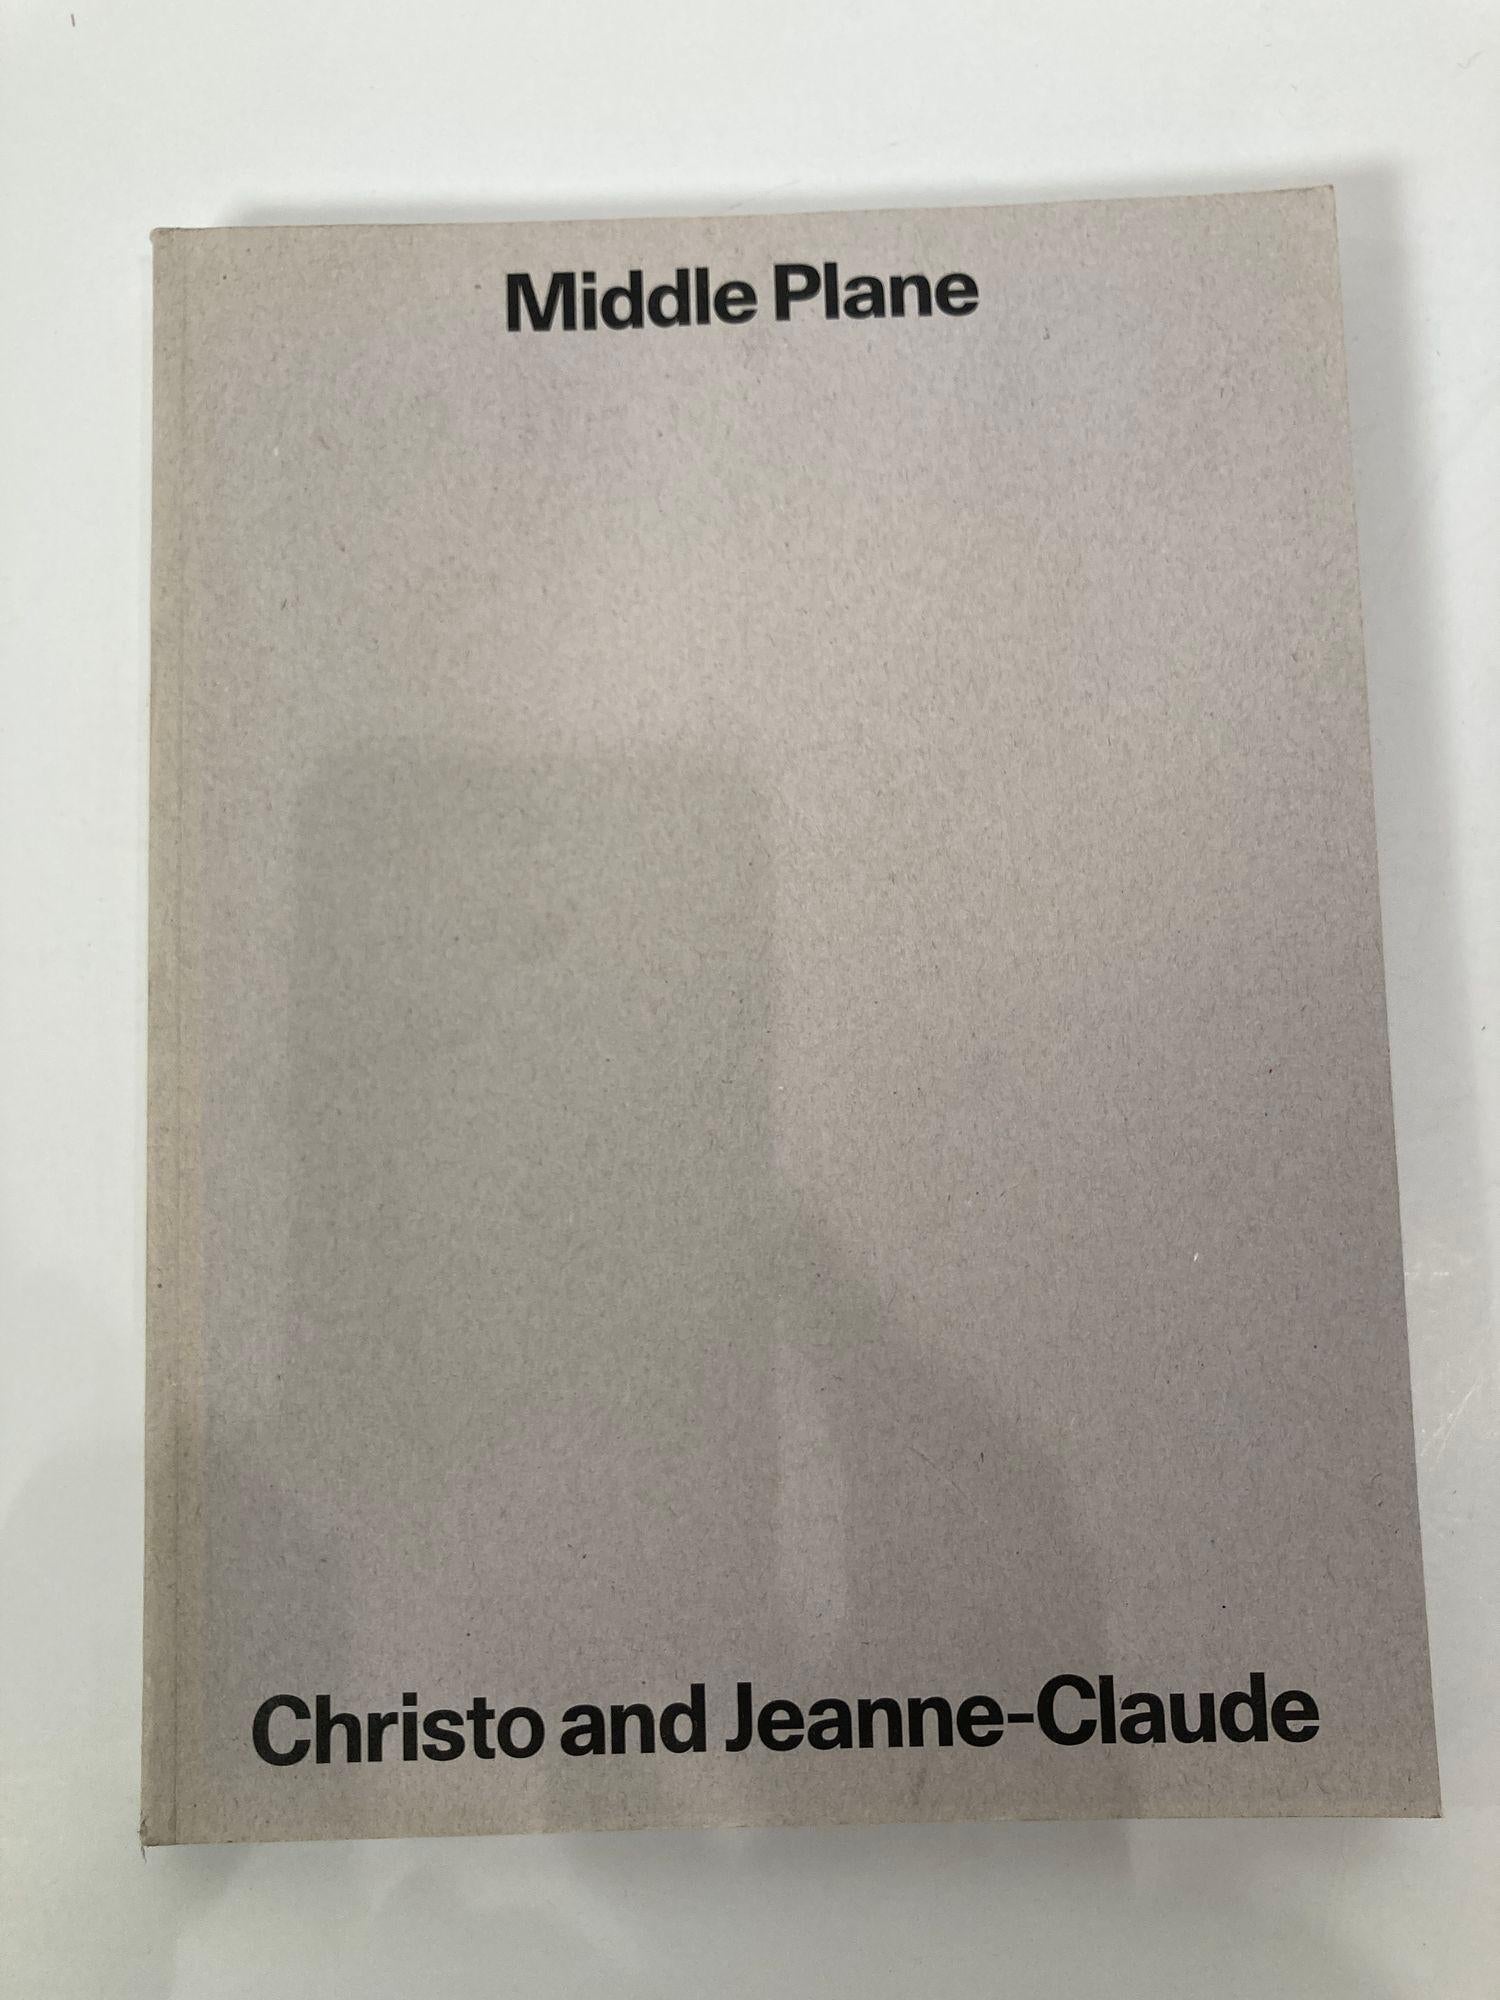 Middle Plane Art Book Christo and Jeanne-Claude.
Middle Plane is an independent, bi-annual art magazine publication based in London.